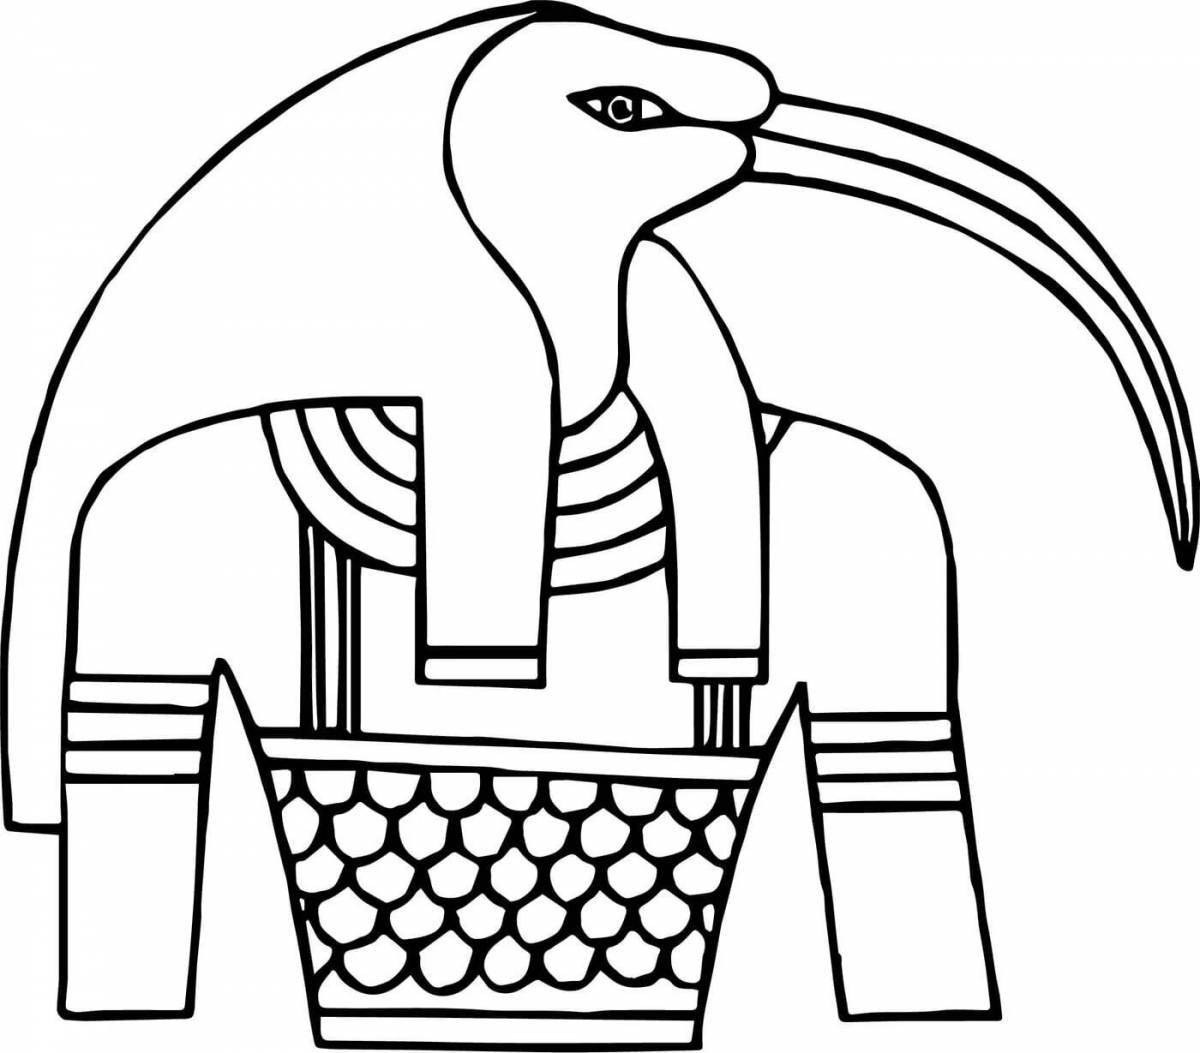 Exalted egyptian gods coloring book